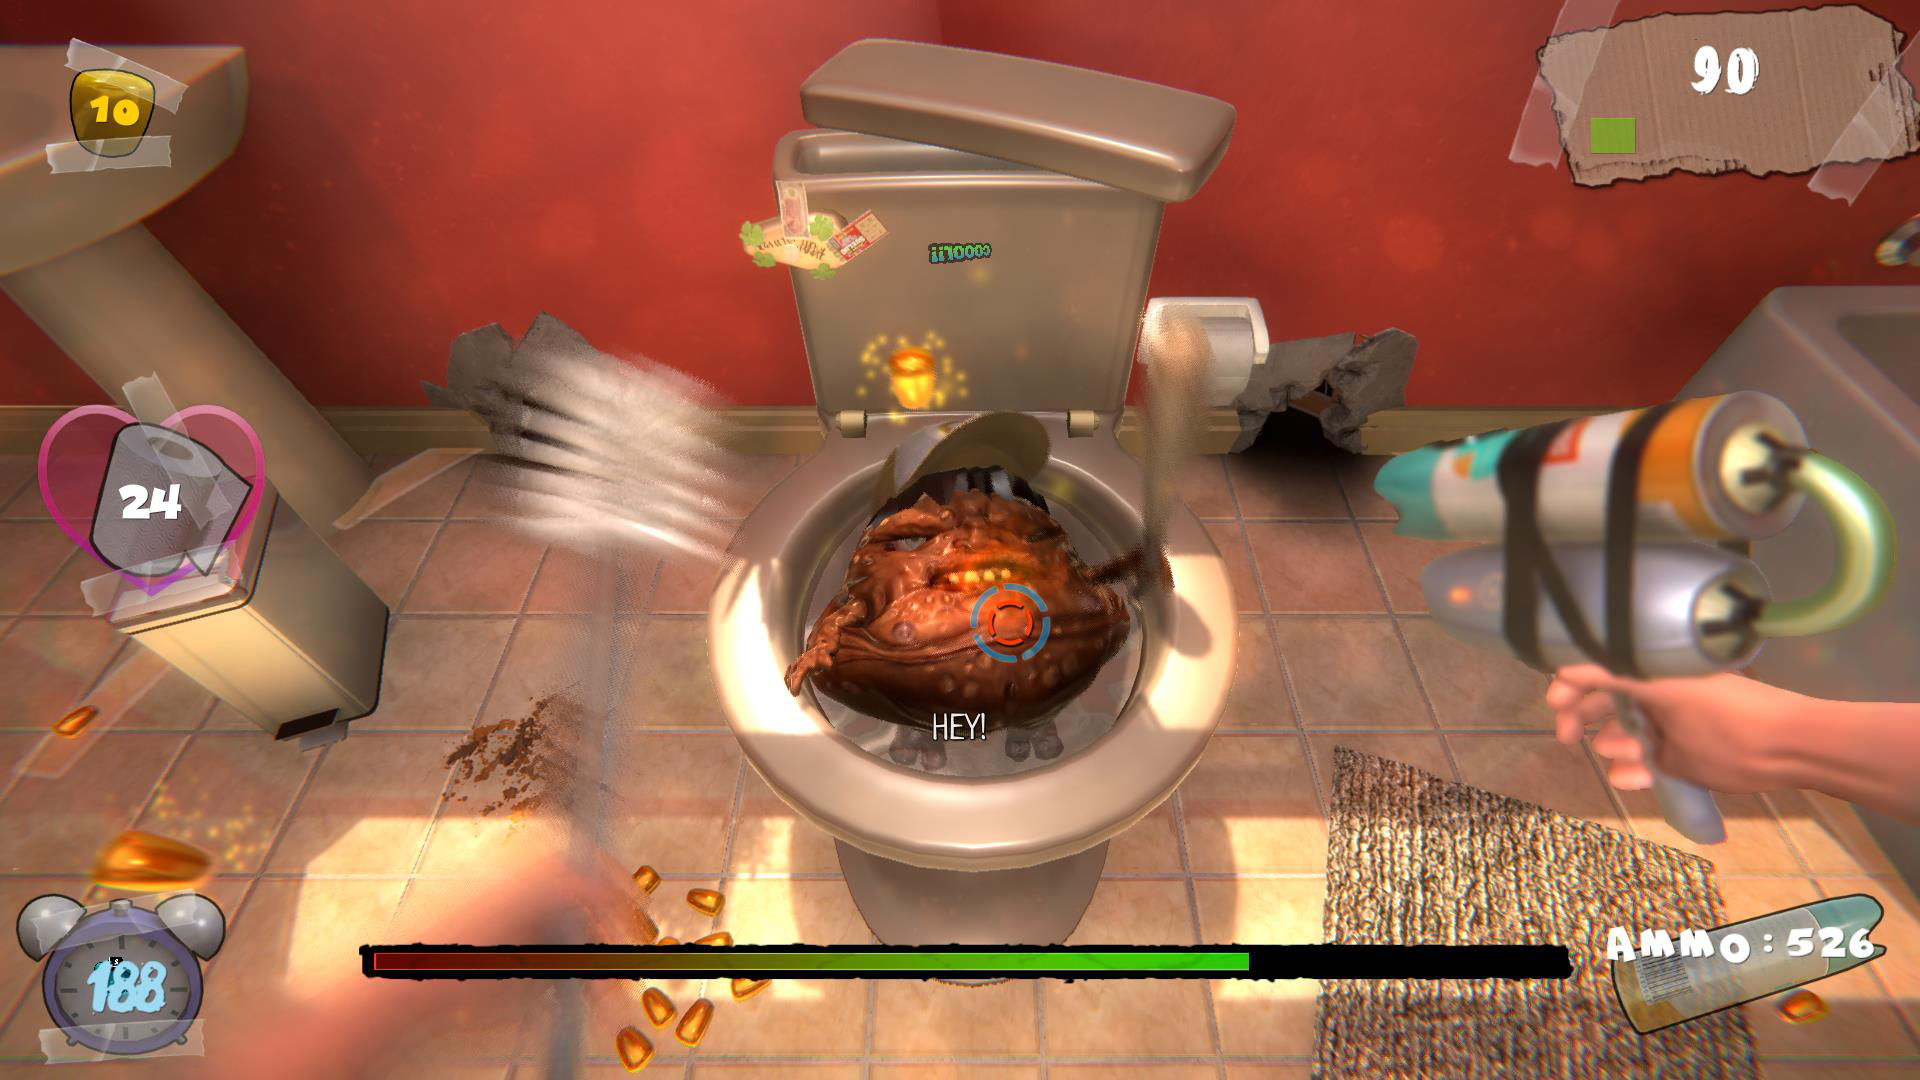 ATTACK OF THE EVIL POOP Free Download